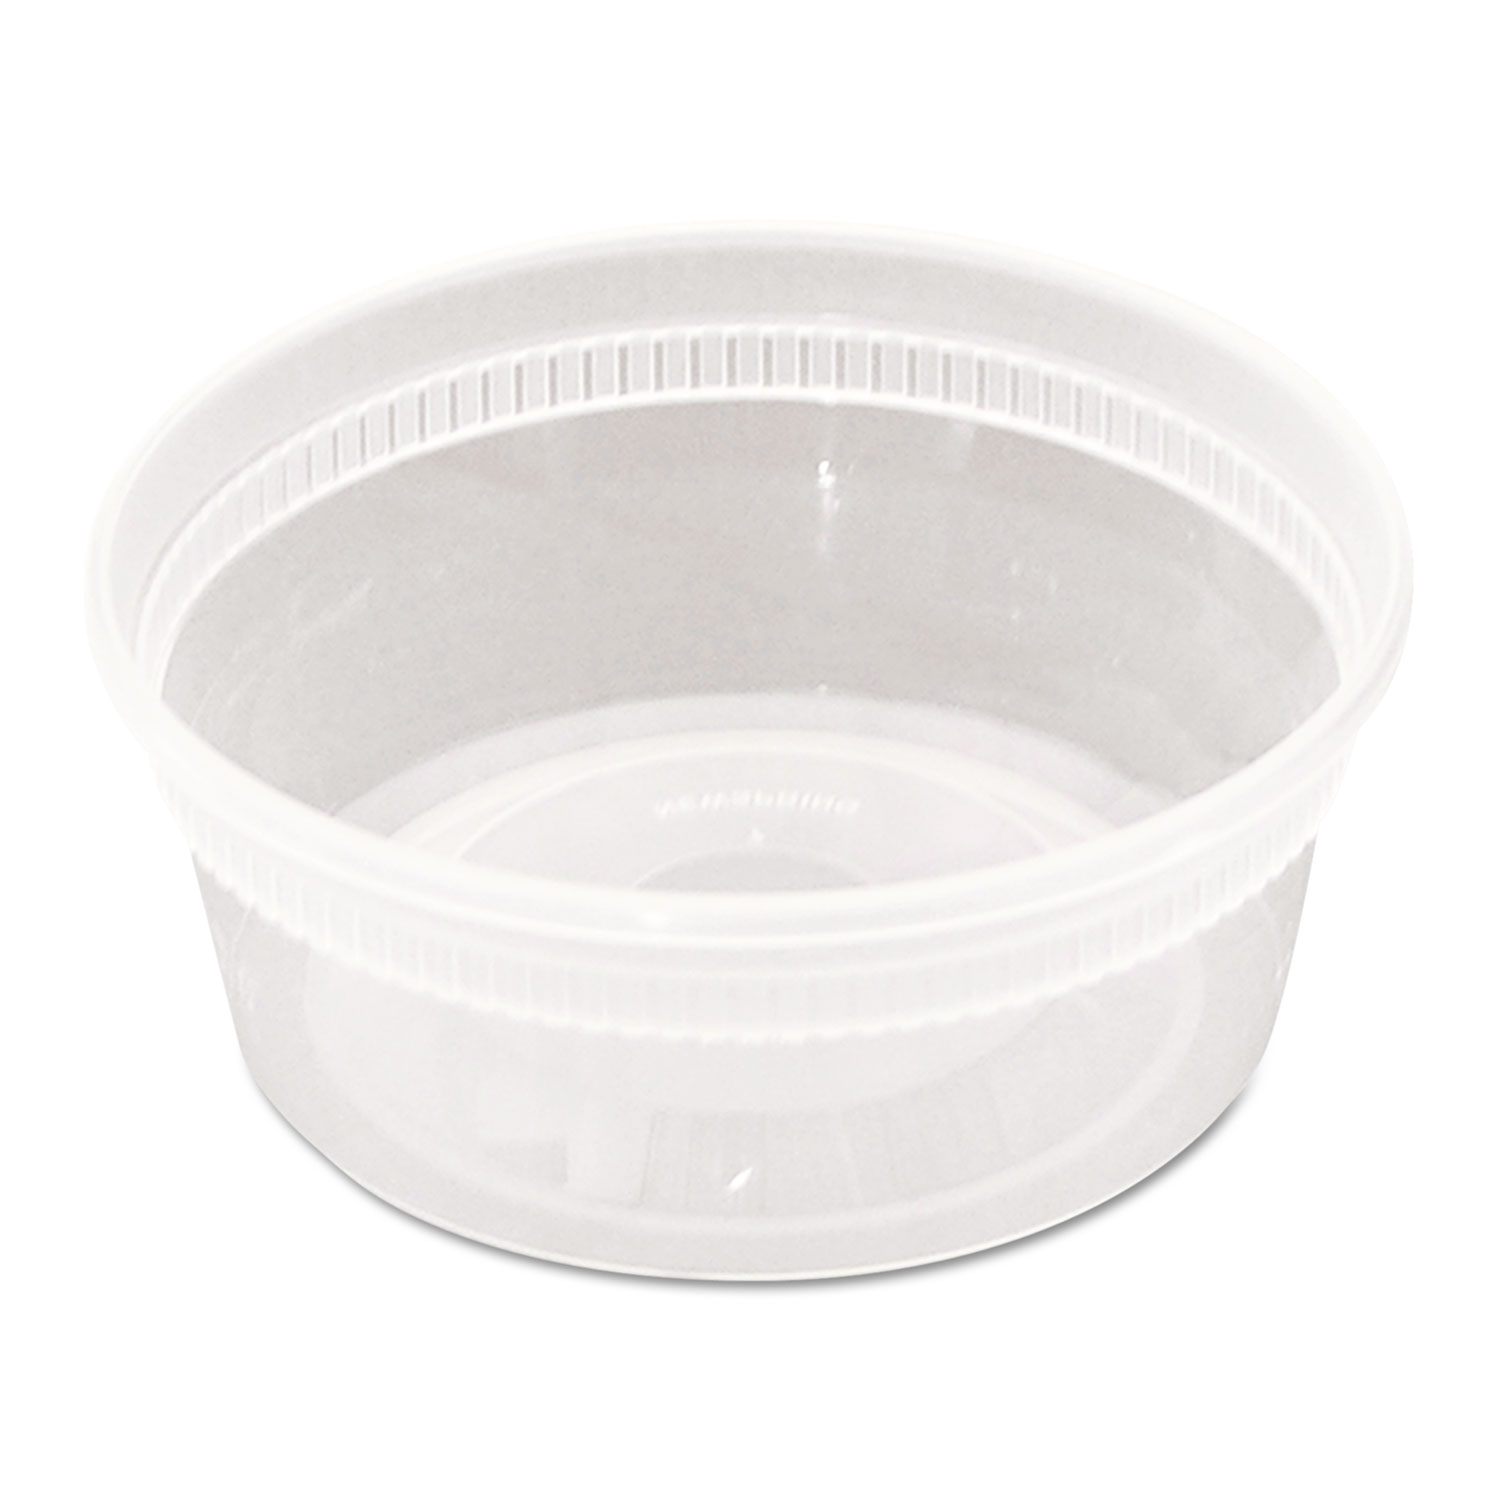  Pactiv YL2508 DELItainer Microwavable Combo, Clear, 8 oz, 1.13 x 2.8 x 1.33, 240/Carton (PCTYL2508) 